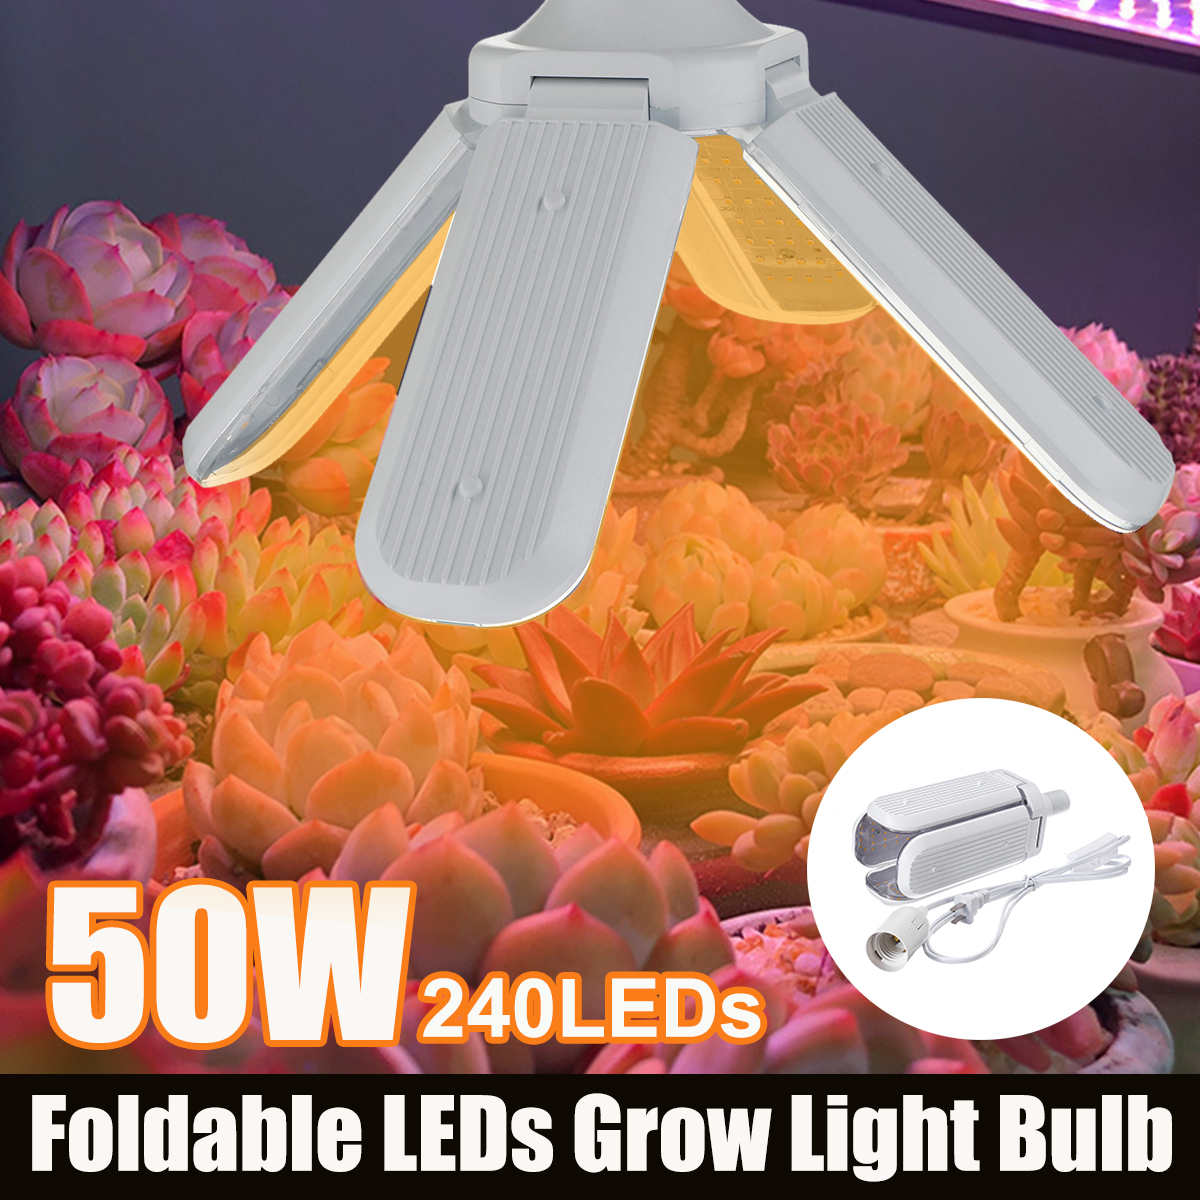 50W-2835-Deformable-Full-Spectrum-Four-Leaf-E27-LED-Grow-Light-Bulb-With-Hanging-Lamp-Holder-Wire-AC-1607490-1